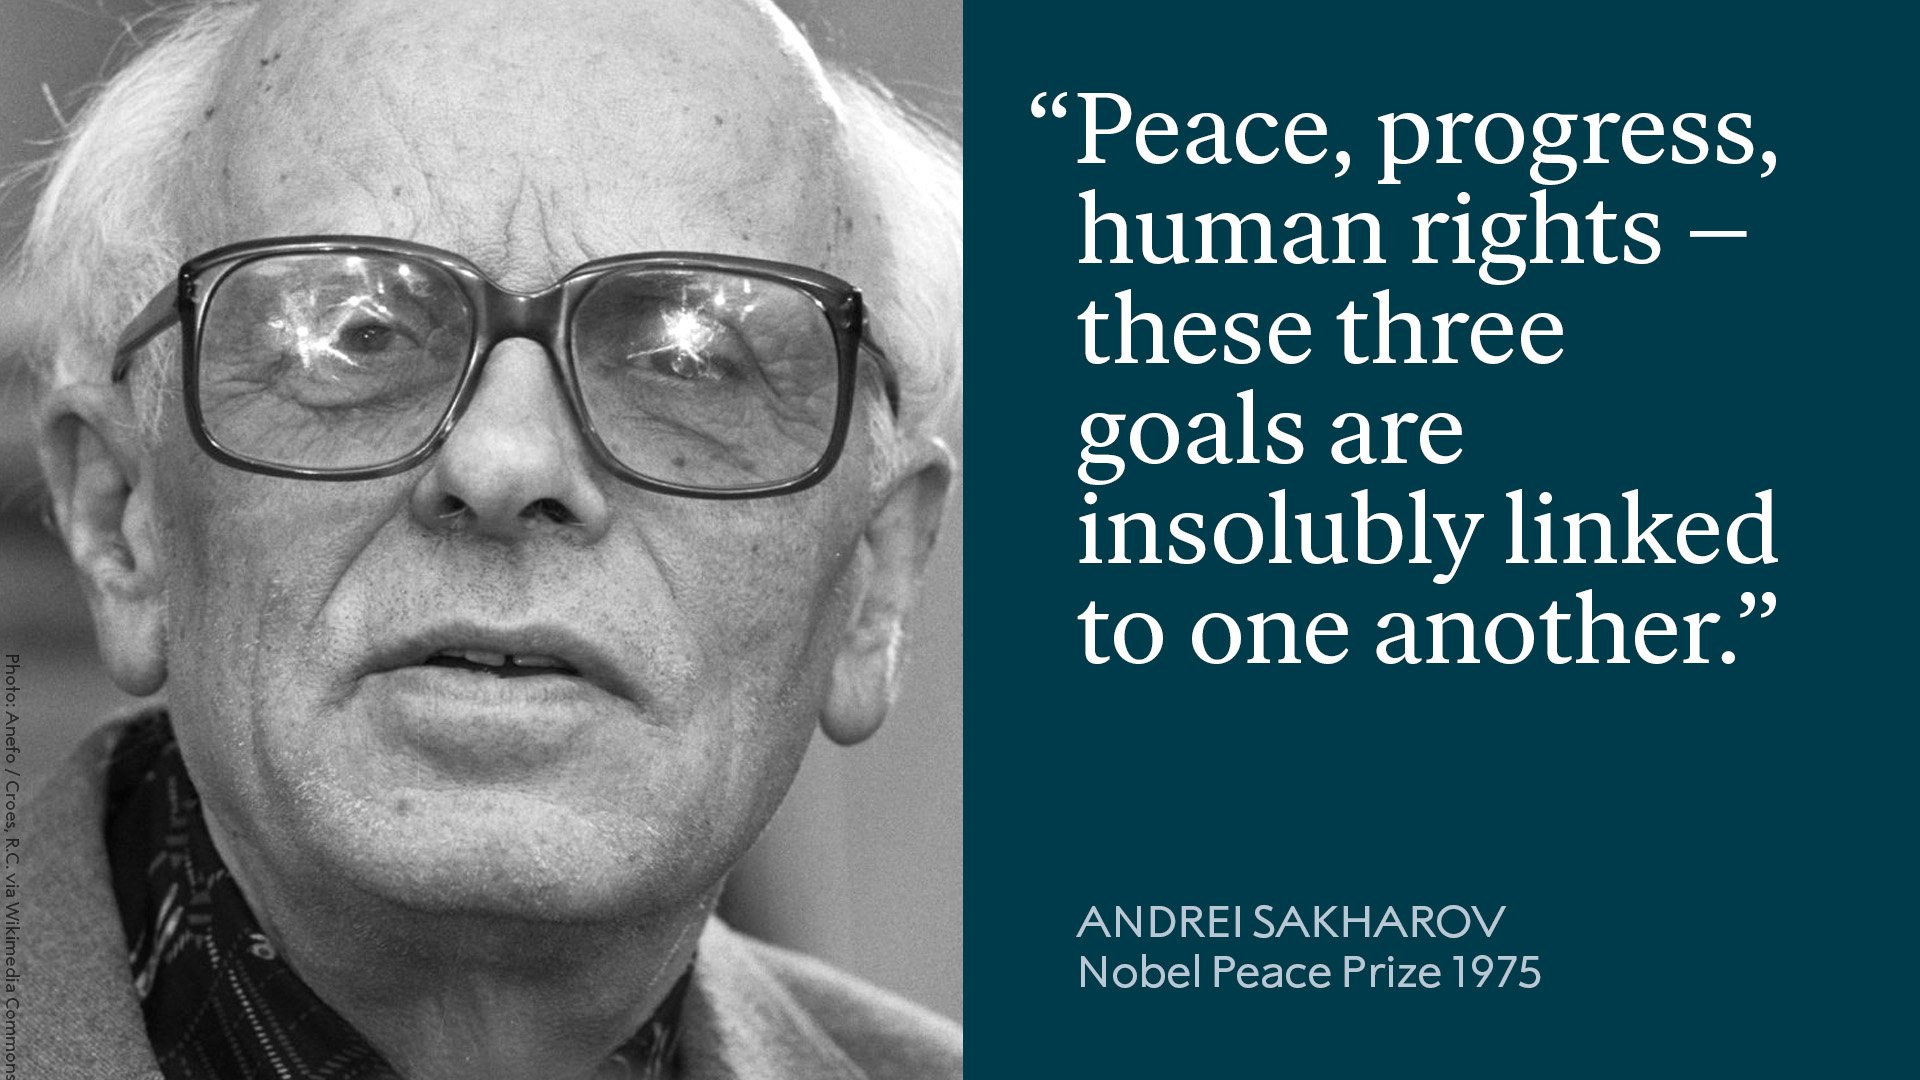 “Peace, progress, human rights – these three goals are insolubly linked to one another: it is impossible to achieve one of these goals if the other two are ignored.”